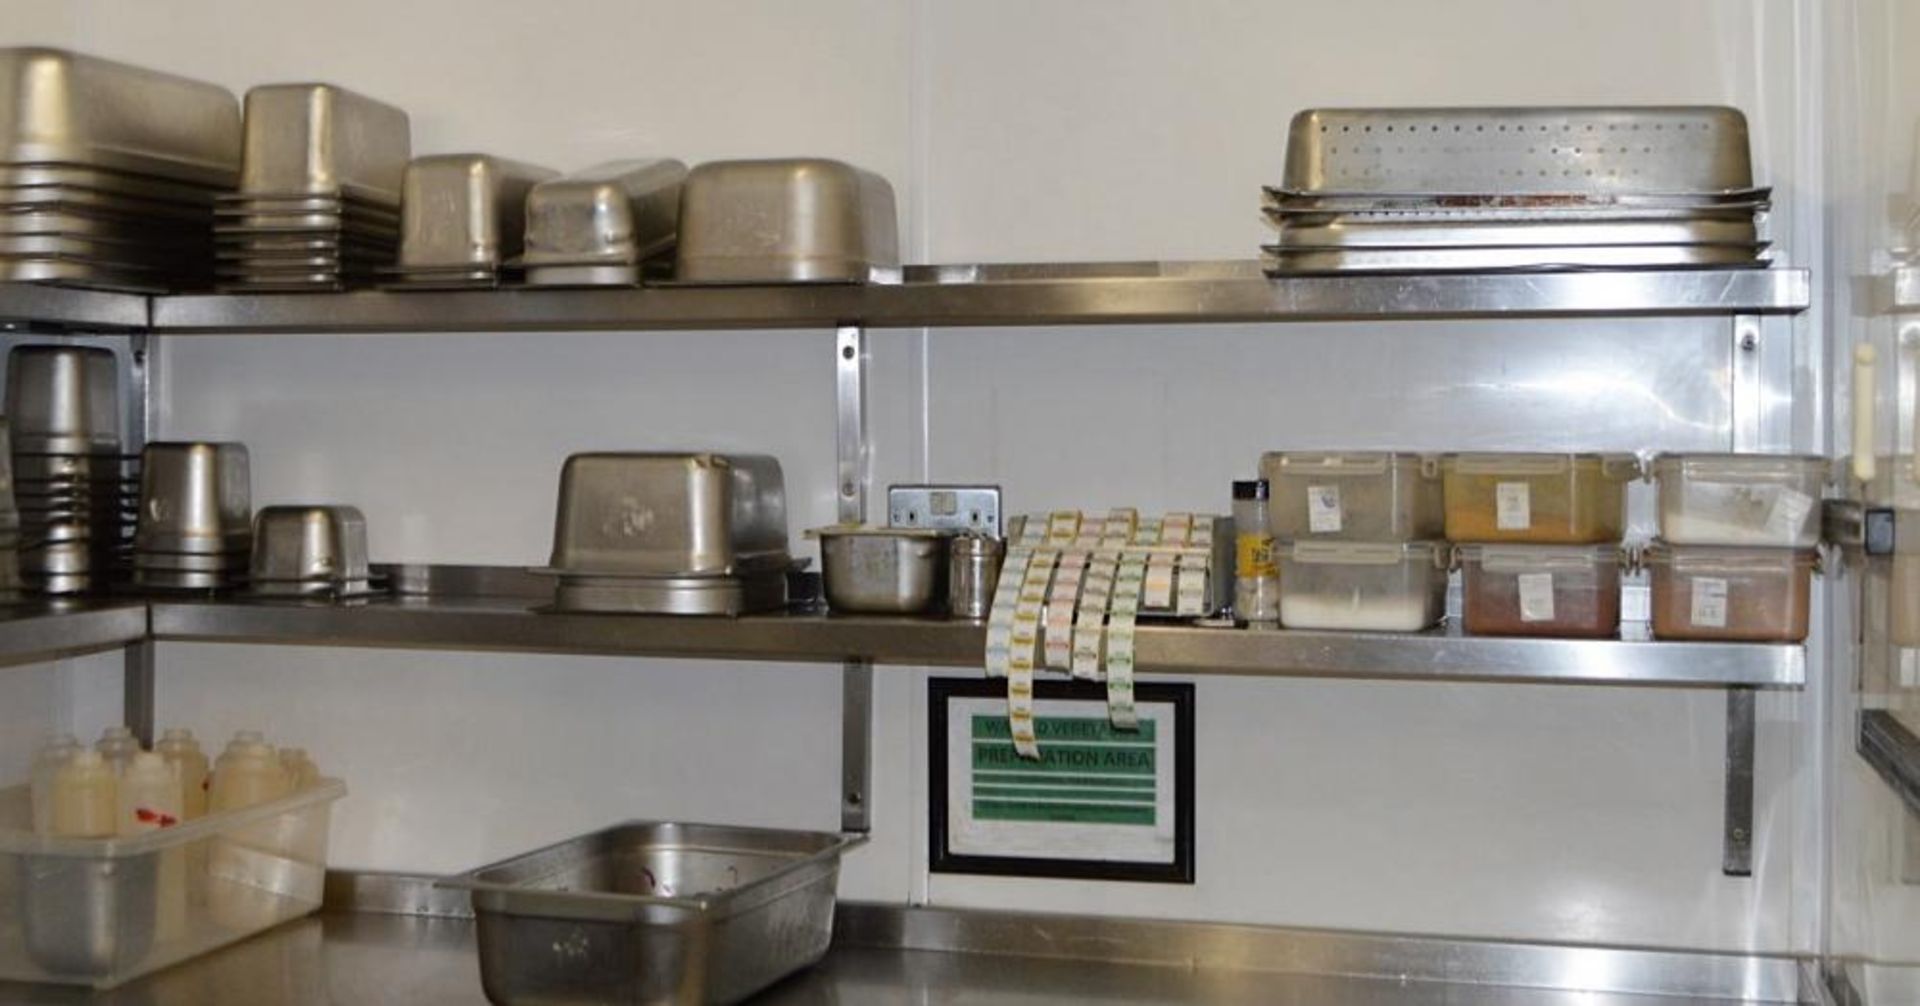 4 x Sections Of Wall Mounted Commercial Kitchen Shelving In Stainless Steel - CL367 - Ref CQ-FB236 - - Image 3 of 3